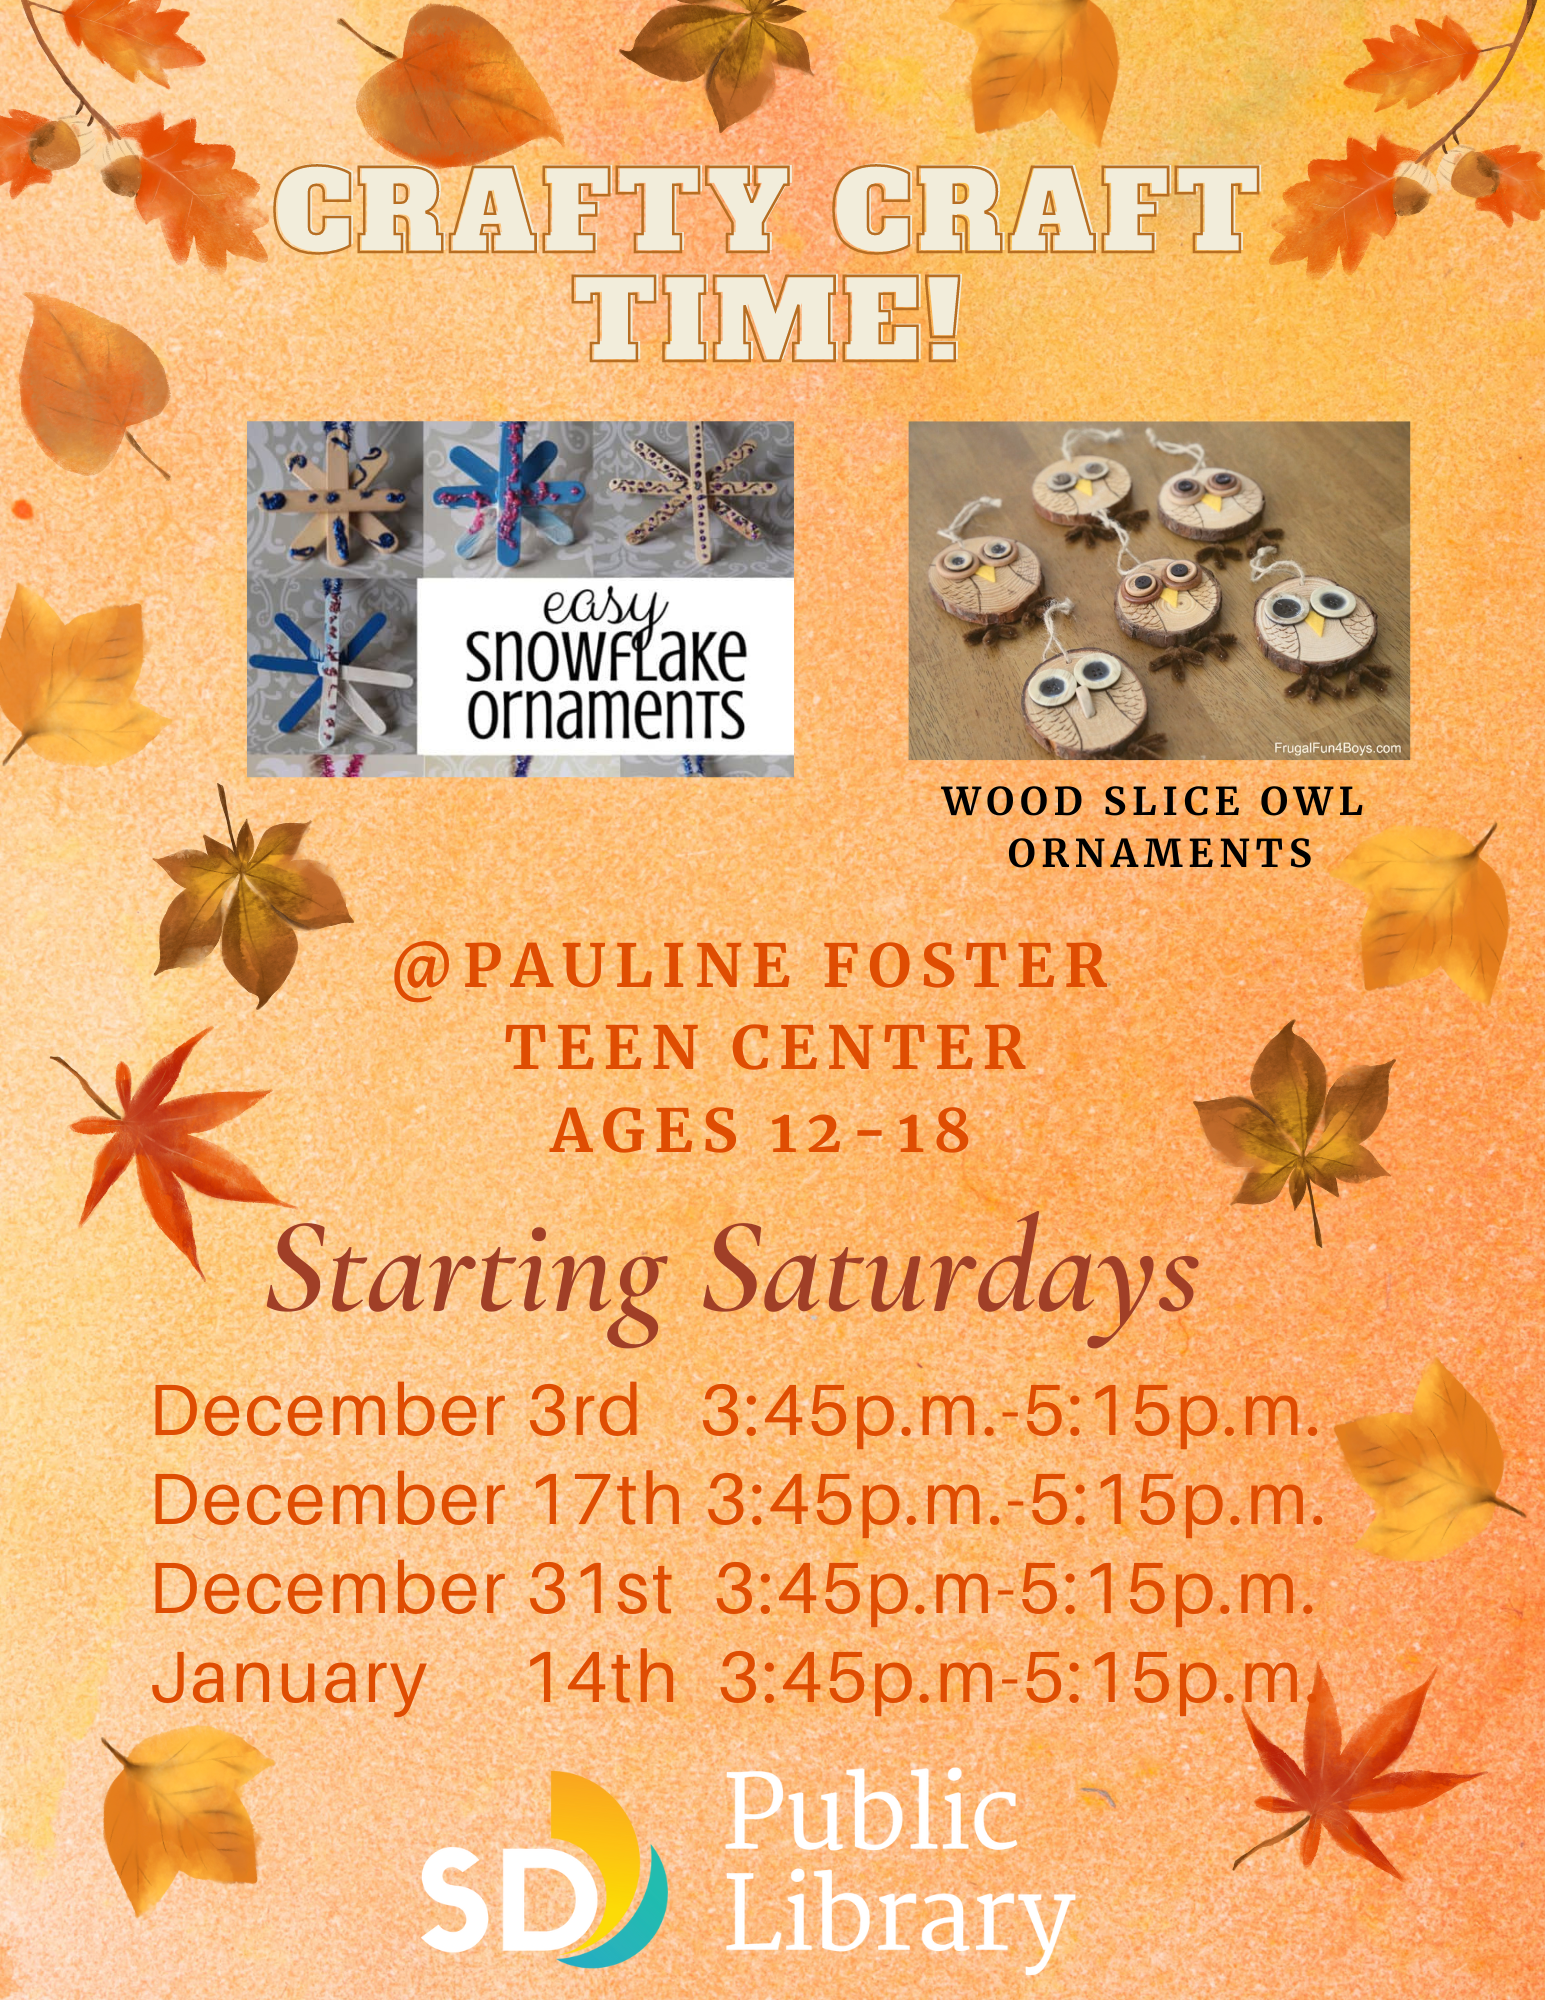 Holiday craft time. Easy snowflake ornaments. Wood slice owl ornaments. At Pauline Foster Teen Center. Ages 12-18. Starting Saturdays. December 3, December 17, December 31, January 14. 3:45pm to 5:15pm.